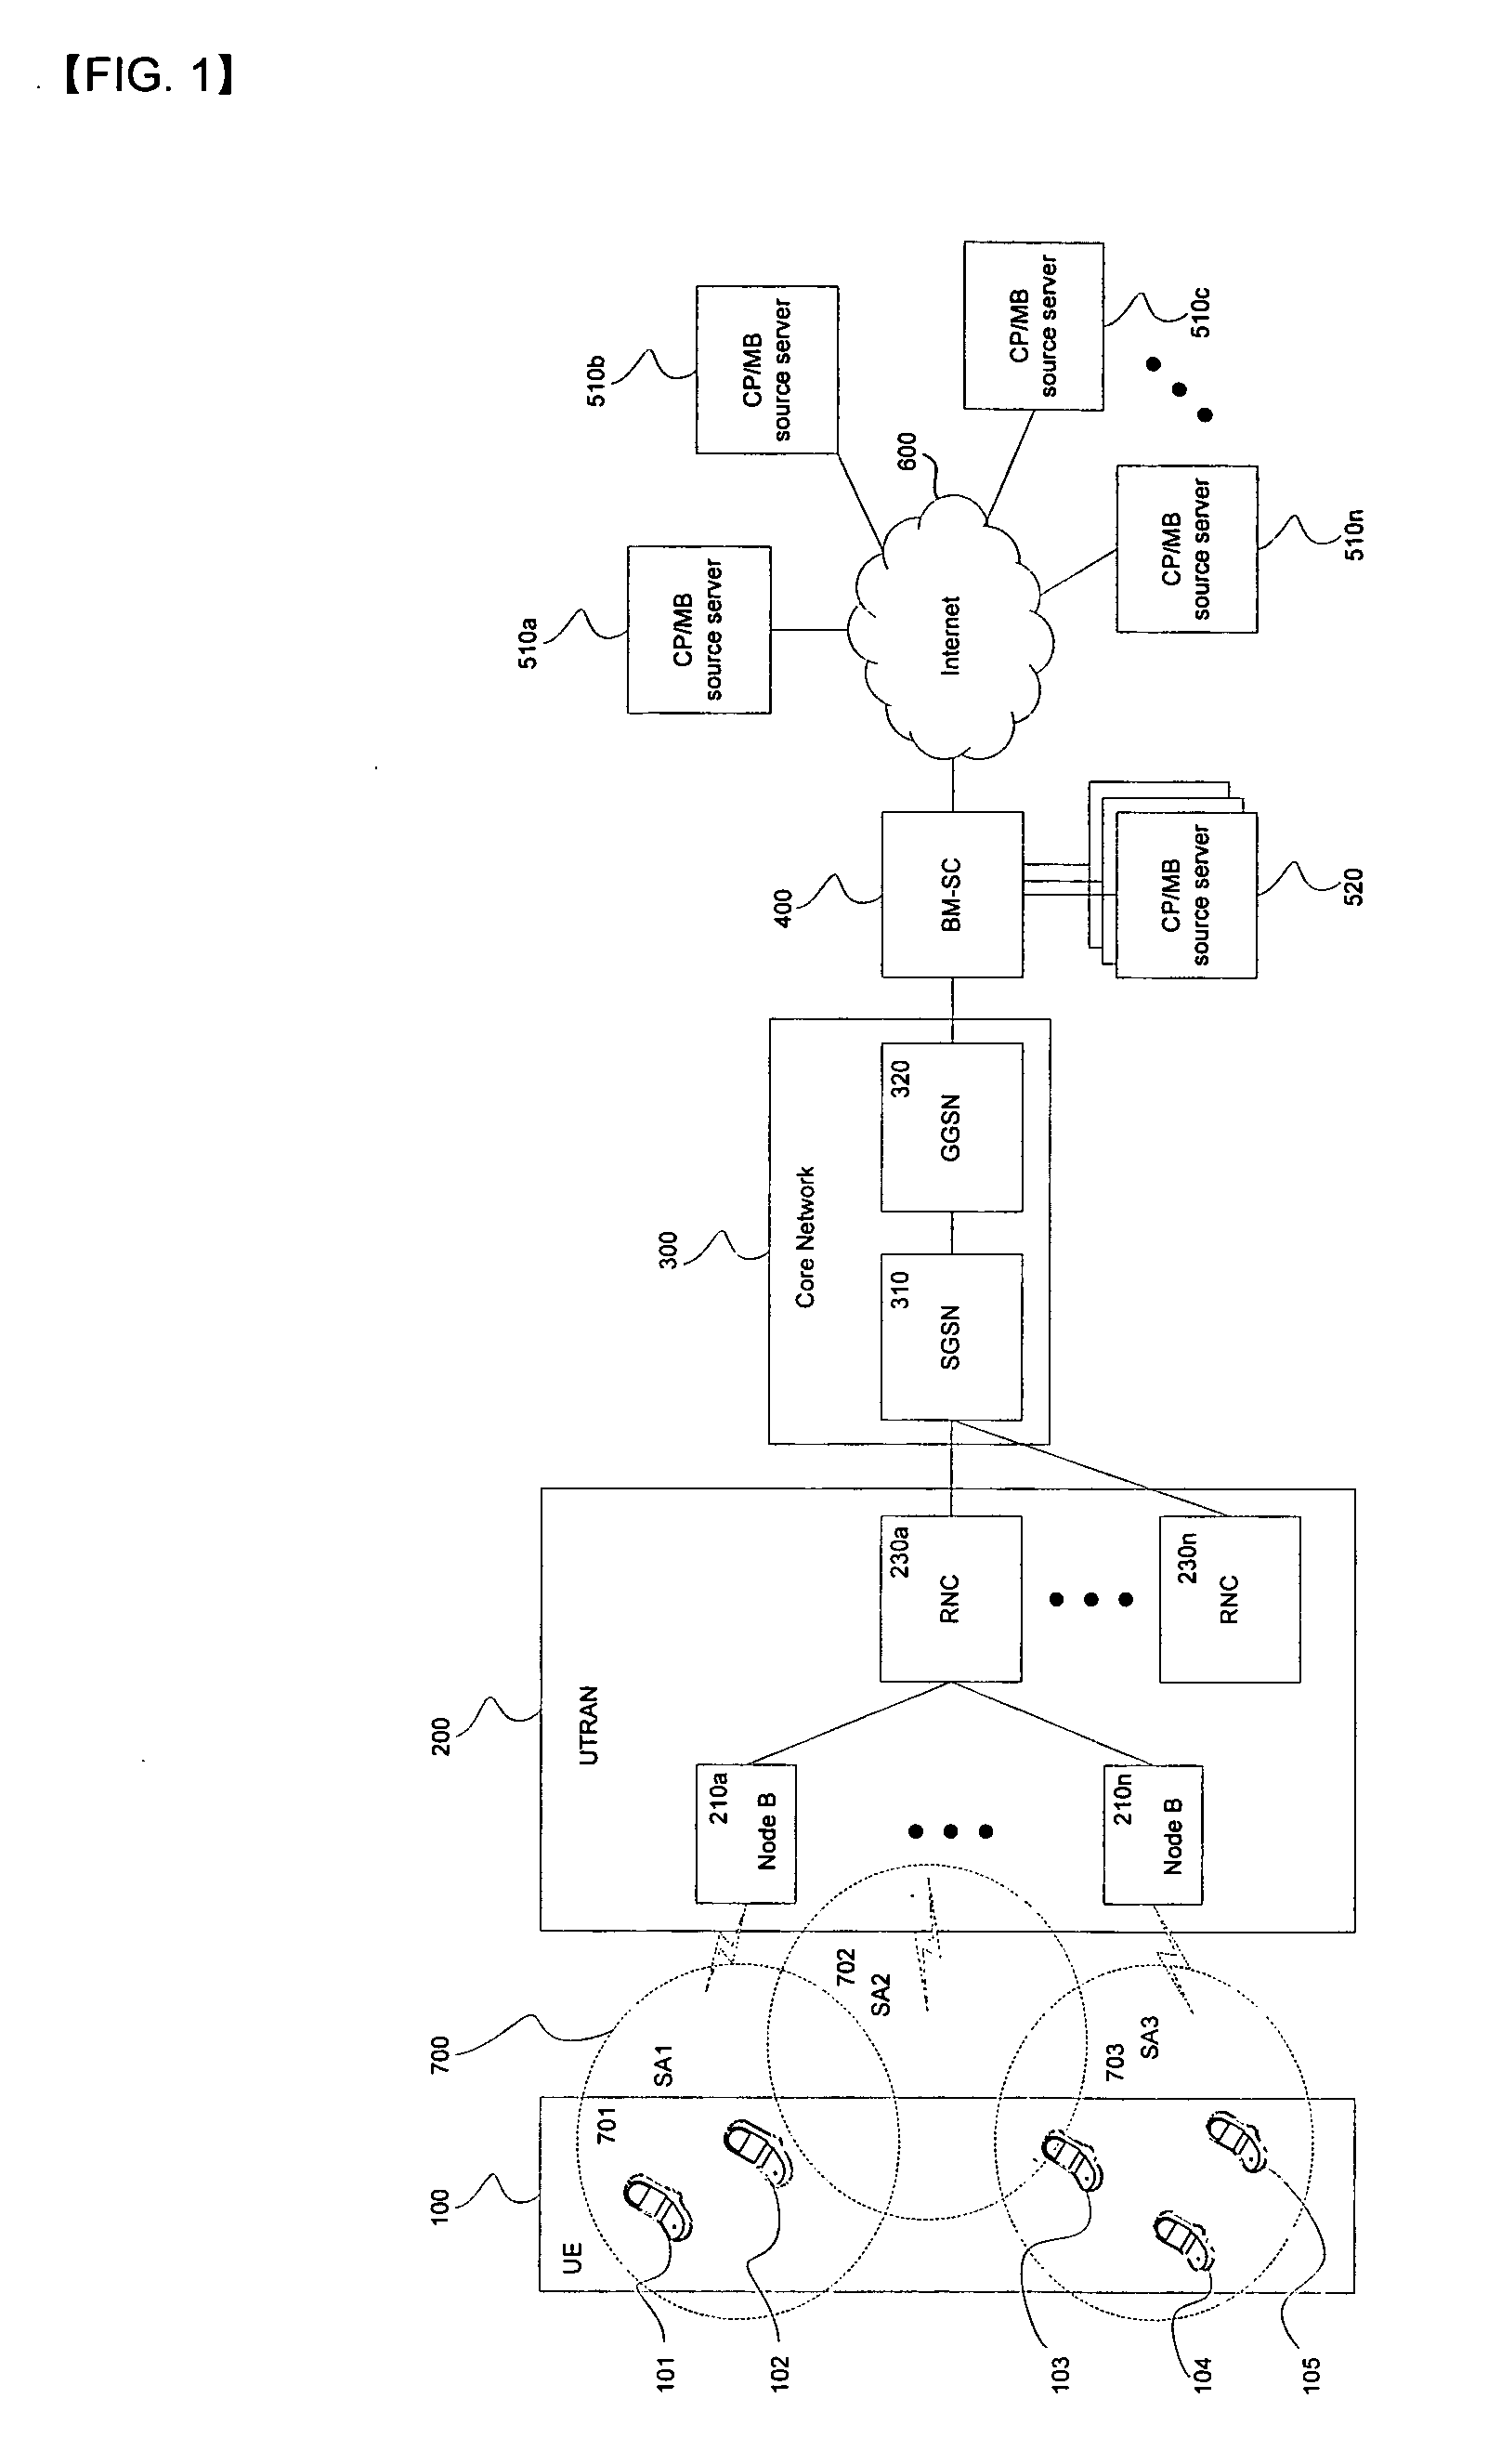 Content packet transmission control method in mobile communication network supporting multimedia broadcast/multicast service